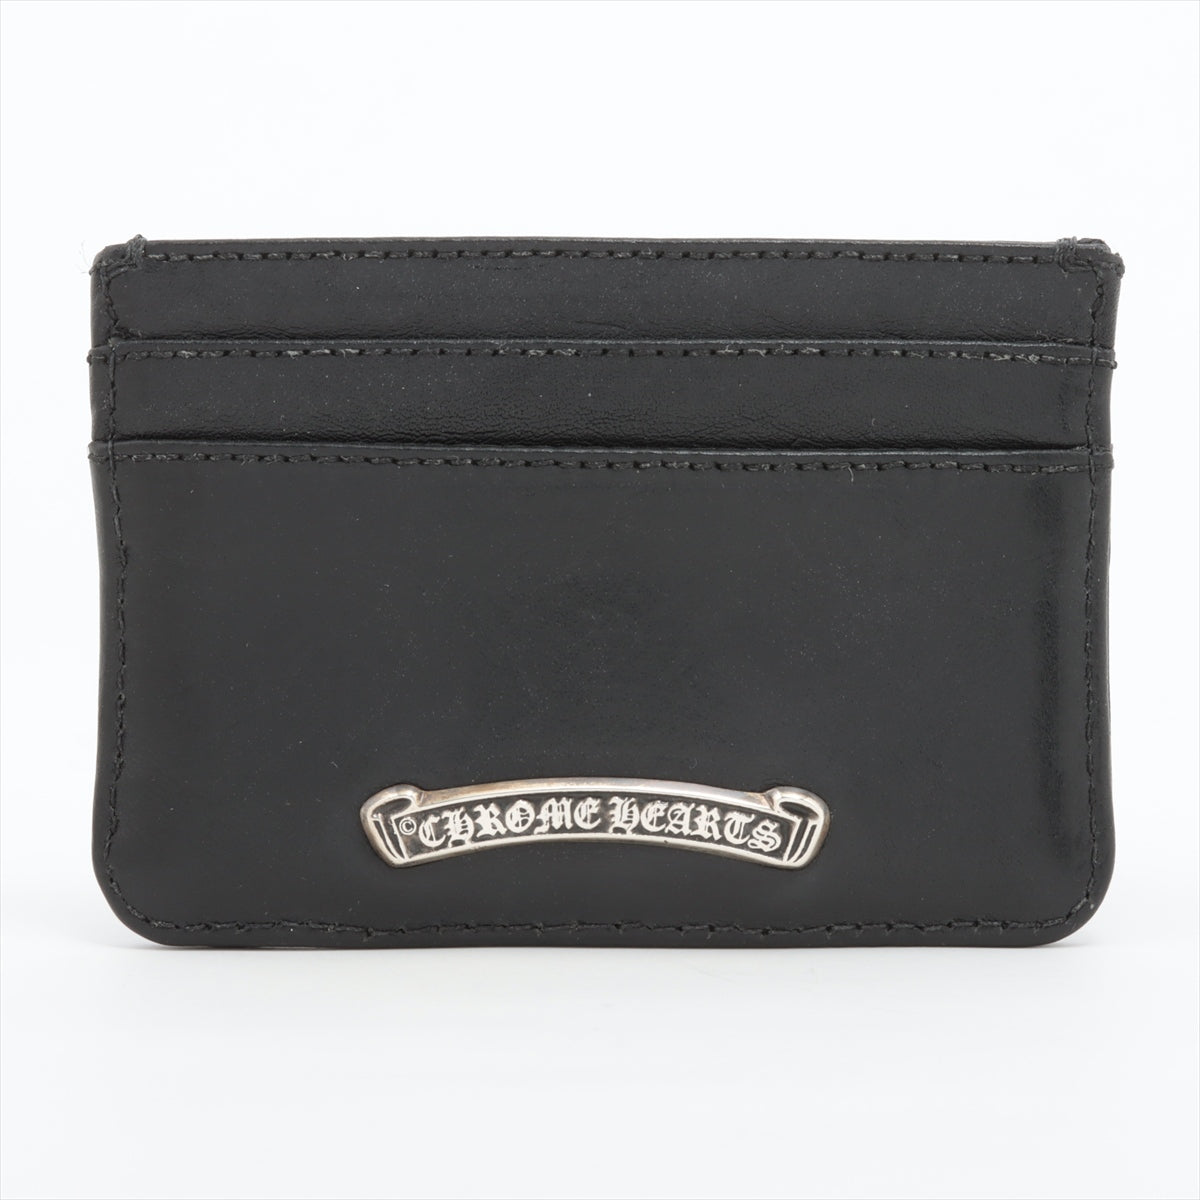 Chrome Hearts Card case No notation With invoice double sided